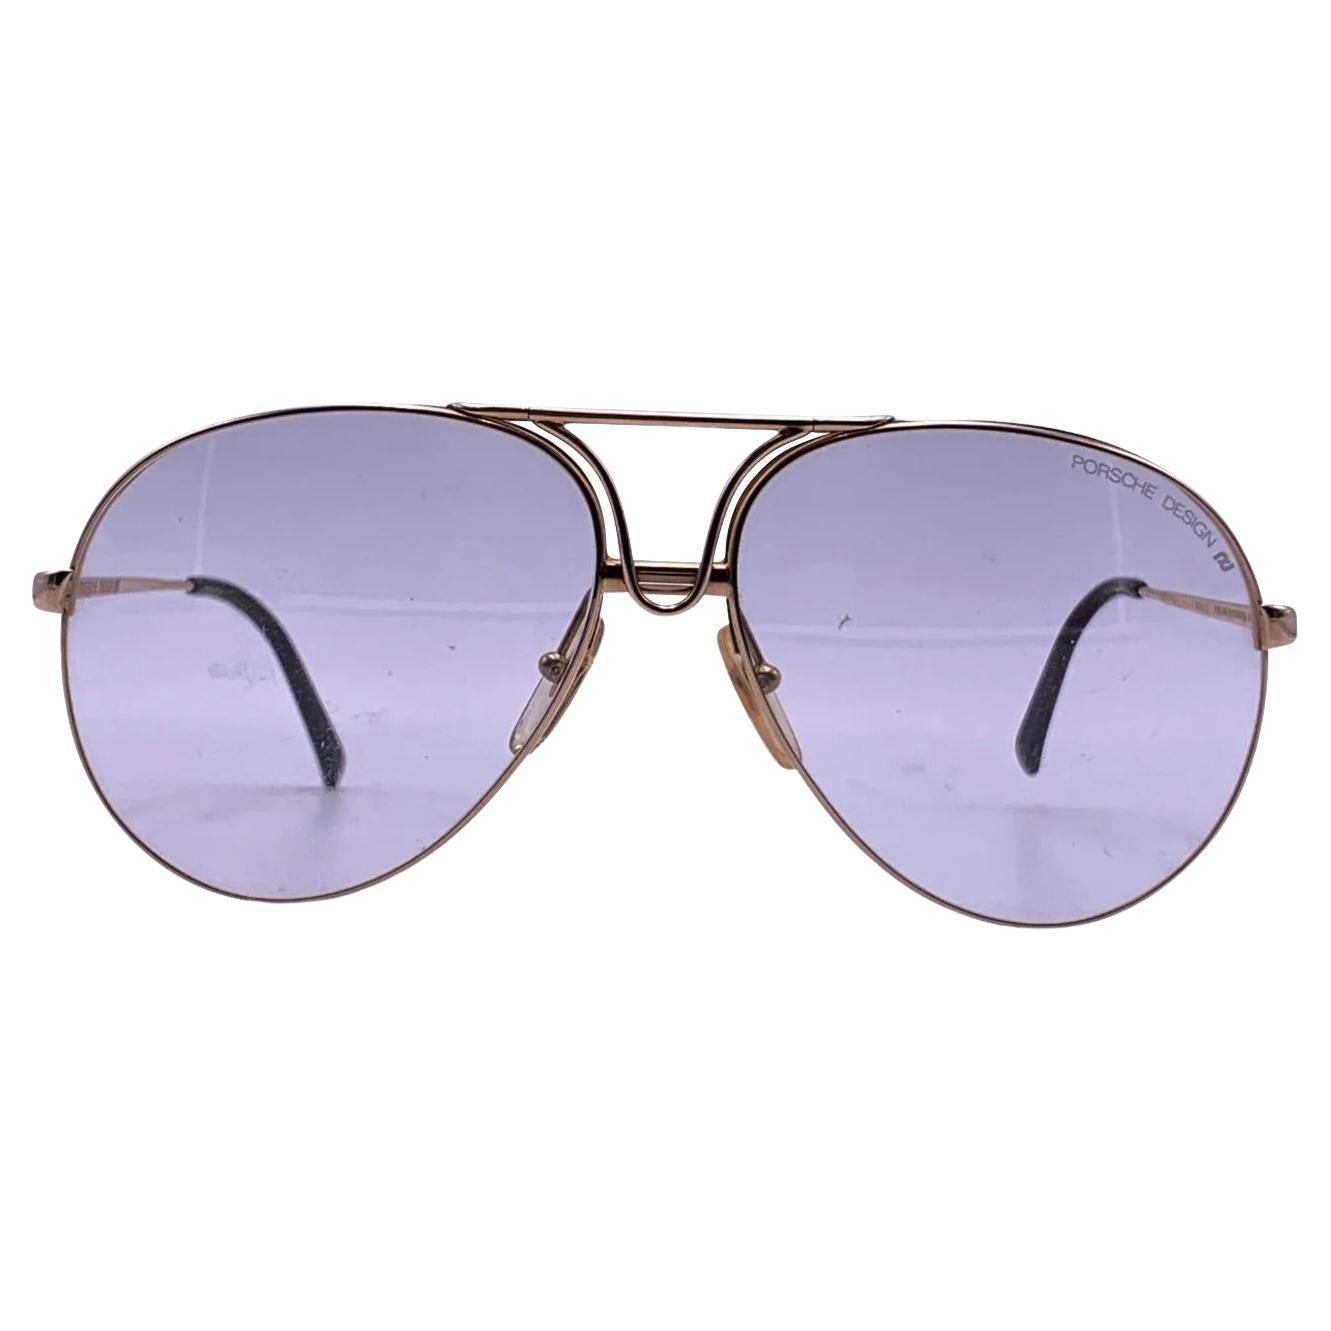 Carrera Metal Sunglasses for Sale in Online Auctions